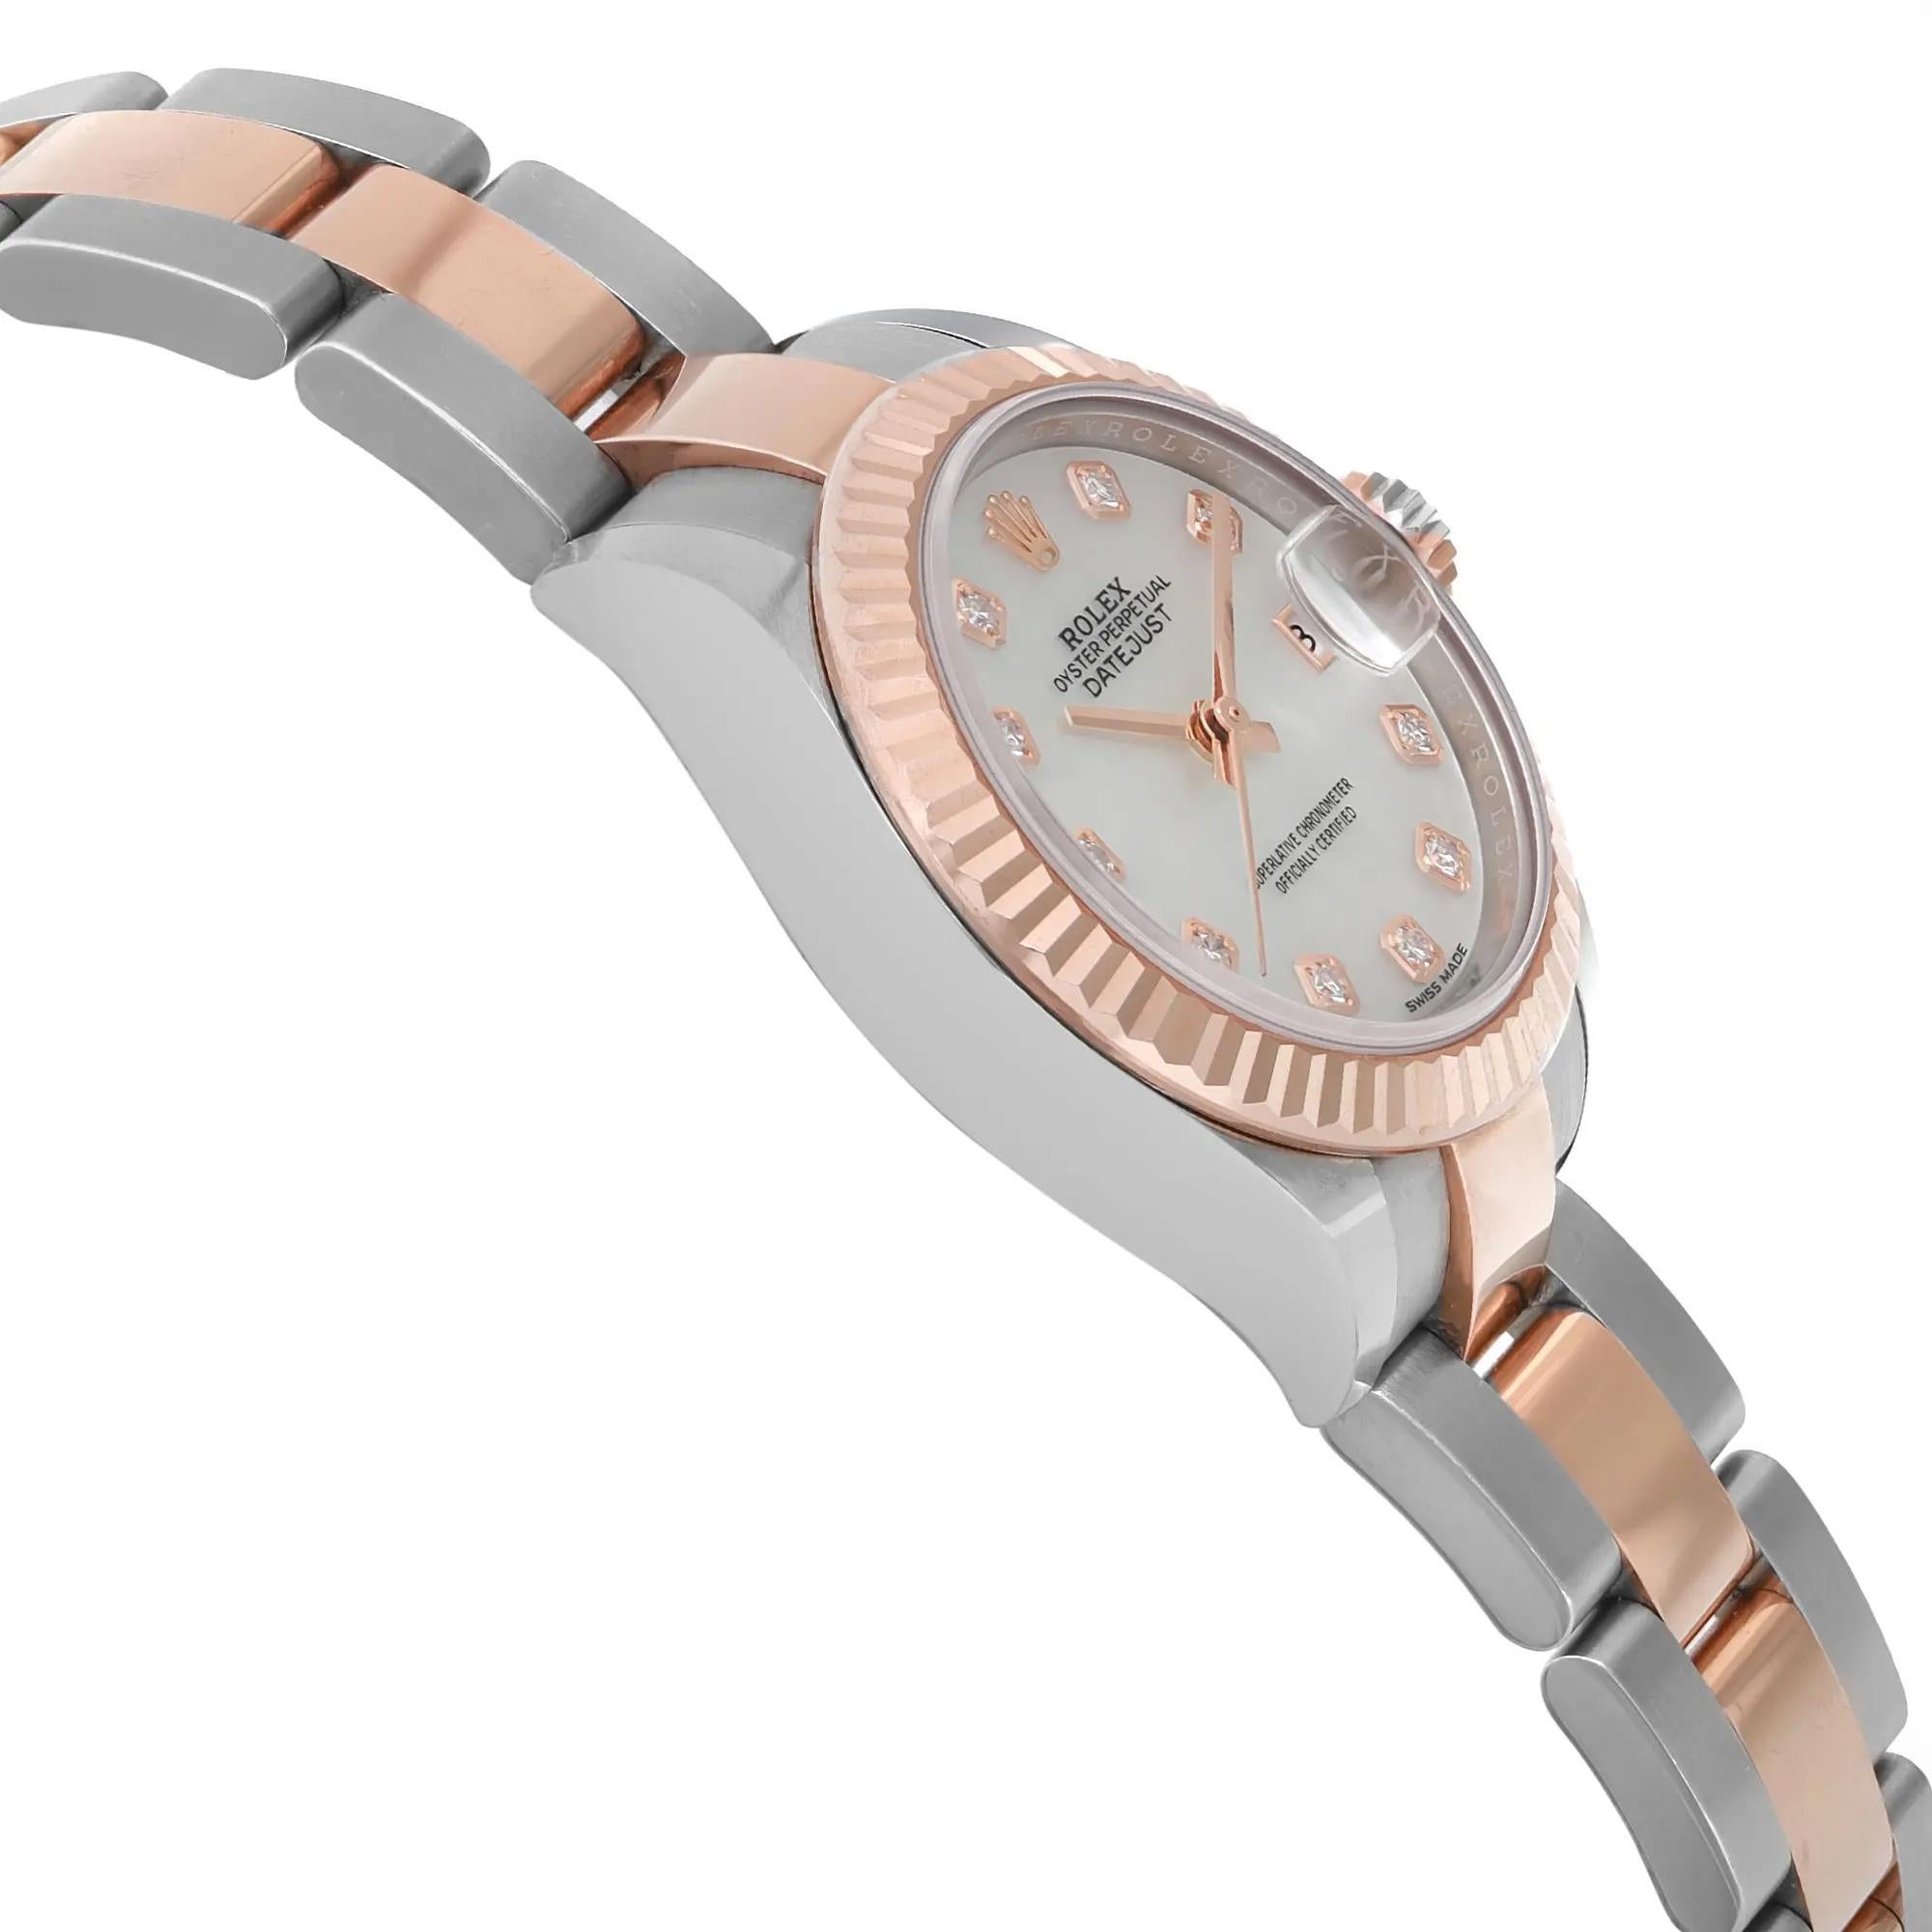 Rolex Lady-Datejust 28mm 18k Rose Gold Steel MOP Diamond Dial Watch 279171 In Excellent Condition For Sale In New York, NY